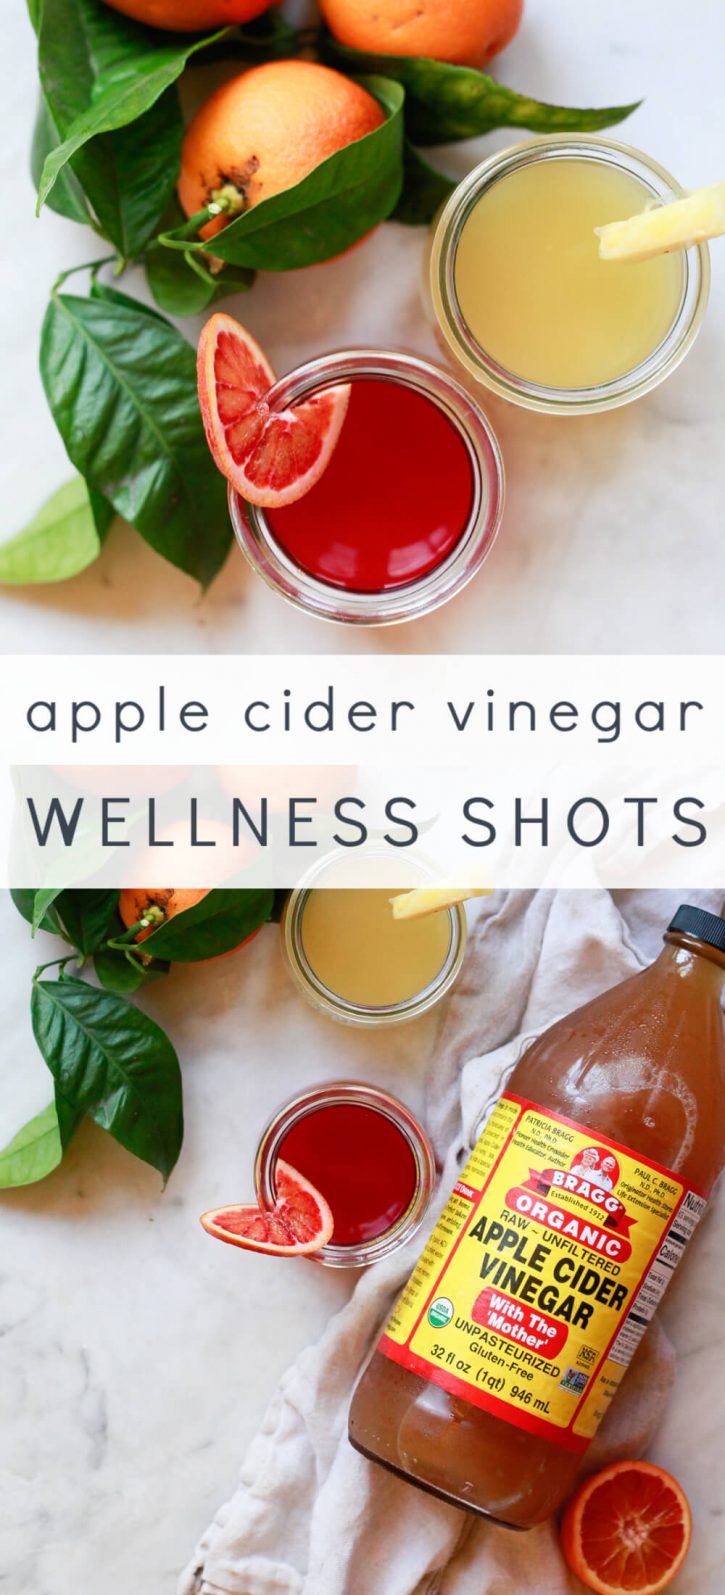 Apple Cider Vinegar Shots recipe and benefits. Enjoy an apple cider vinegar shot a day with these two easy and tasty recipes! Made with Bragg's apple cider vinegar with the mother and fresh juice, these ACV shots are great for natural immune support, detox, wellness, and weight loss*